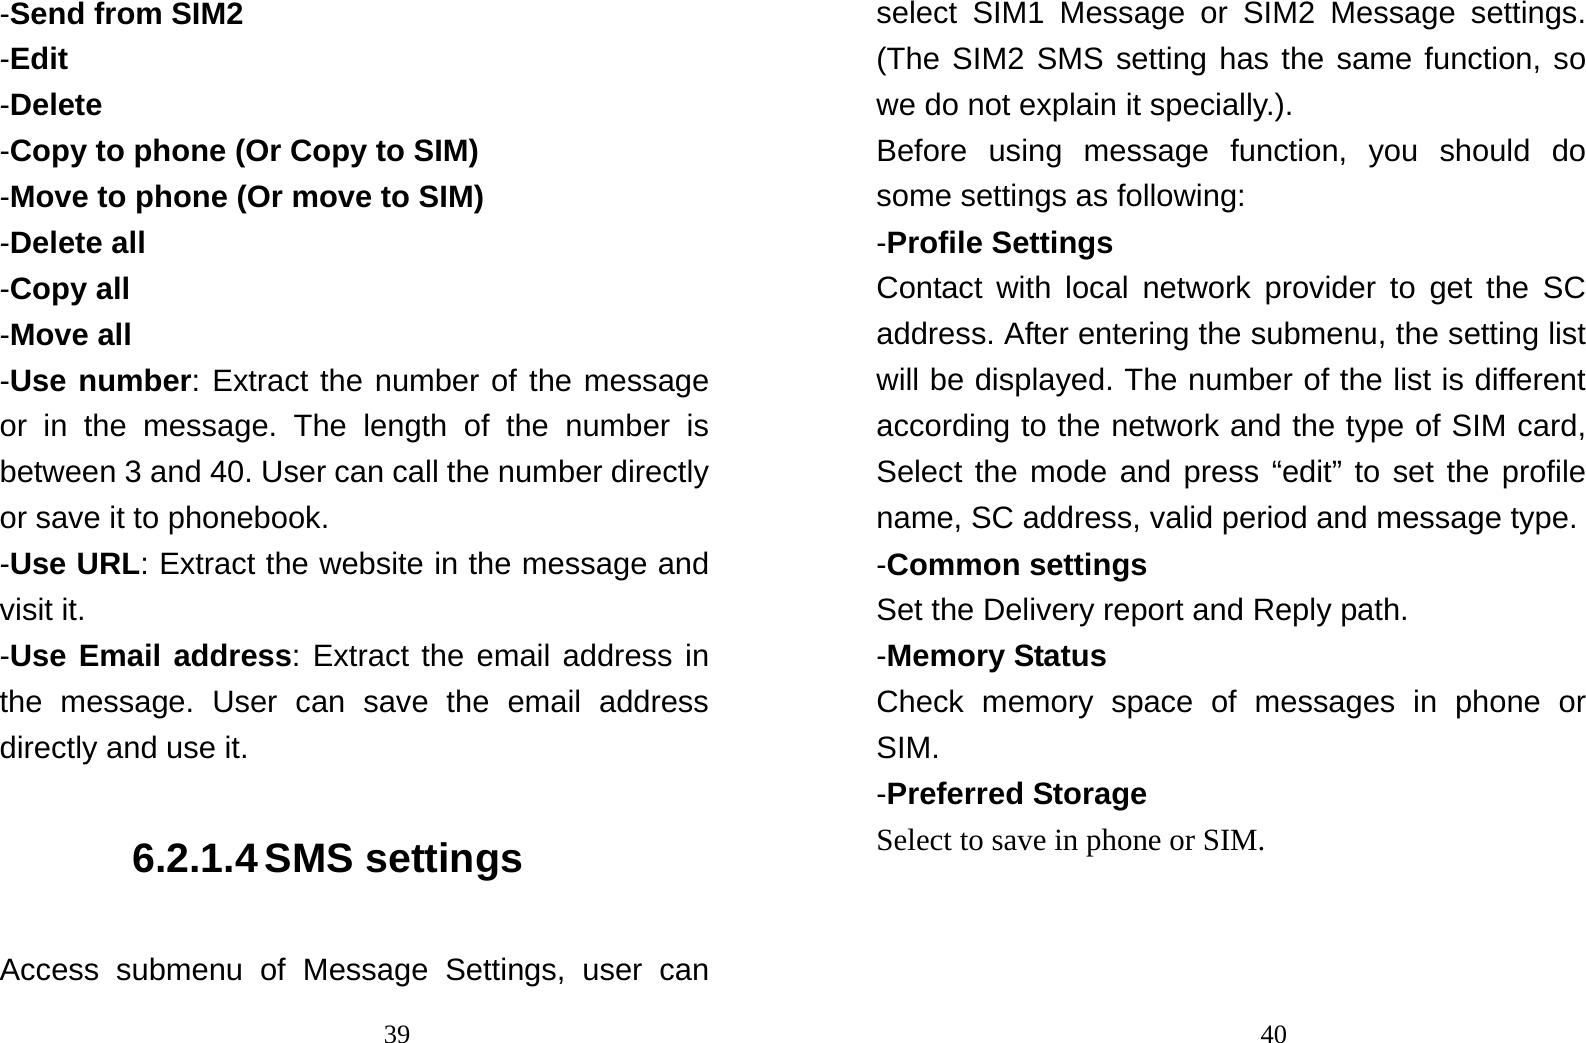                                39-Send from SIM2 -Edit -Delete -Copy to phone (Or Copy to SIM) -Move to phone (Or move to SIM) -Delete all -Copy all -Move all -Use number: Extract the number of the message or in the message. The length of the number is between 3 and 40. User can call the number directly or save it to phonebook. -Use URL: Extract the website in the message and visit it. -Use Email address: Extract the email address in the message. User can save the email address directly and use it. 6.2.1.4 SMS settings Access submenu of Message Settings, user can                                40select SIM1 Message or SIM2 Message settings. (The SIM2 SMS setting has the same function, so we do not explain it specially.). Before using message function, you should do some settings as following: -Profile Settings Contact with local network provider to get the SC address. After entering the submenu, the setting list will be displayed. The number of the list is different according to the network and the type of SIM card, Select the mode and press “edit” to set the profile name, SC address, valid period and message type. -Common settings Set the Delivery report and Reply path. -Memory Status Check memory space of messages in phone or SIM. -Preferred Storage Select to save in phone or SIM. 